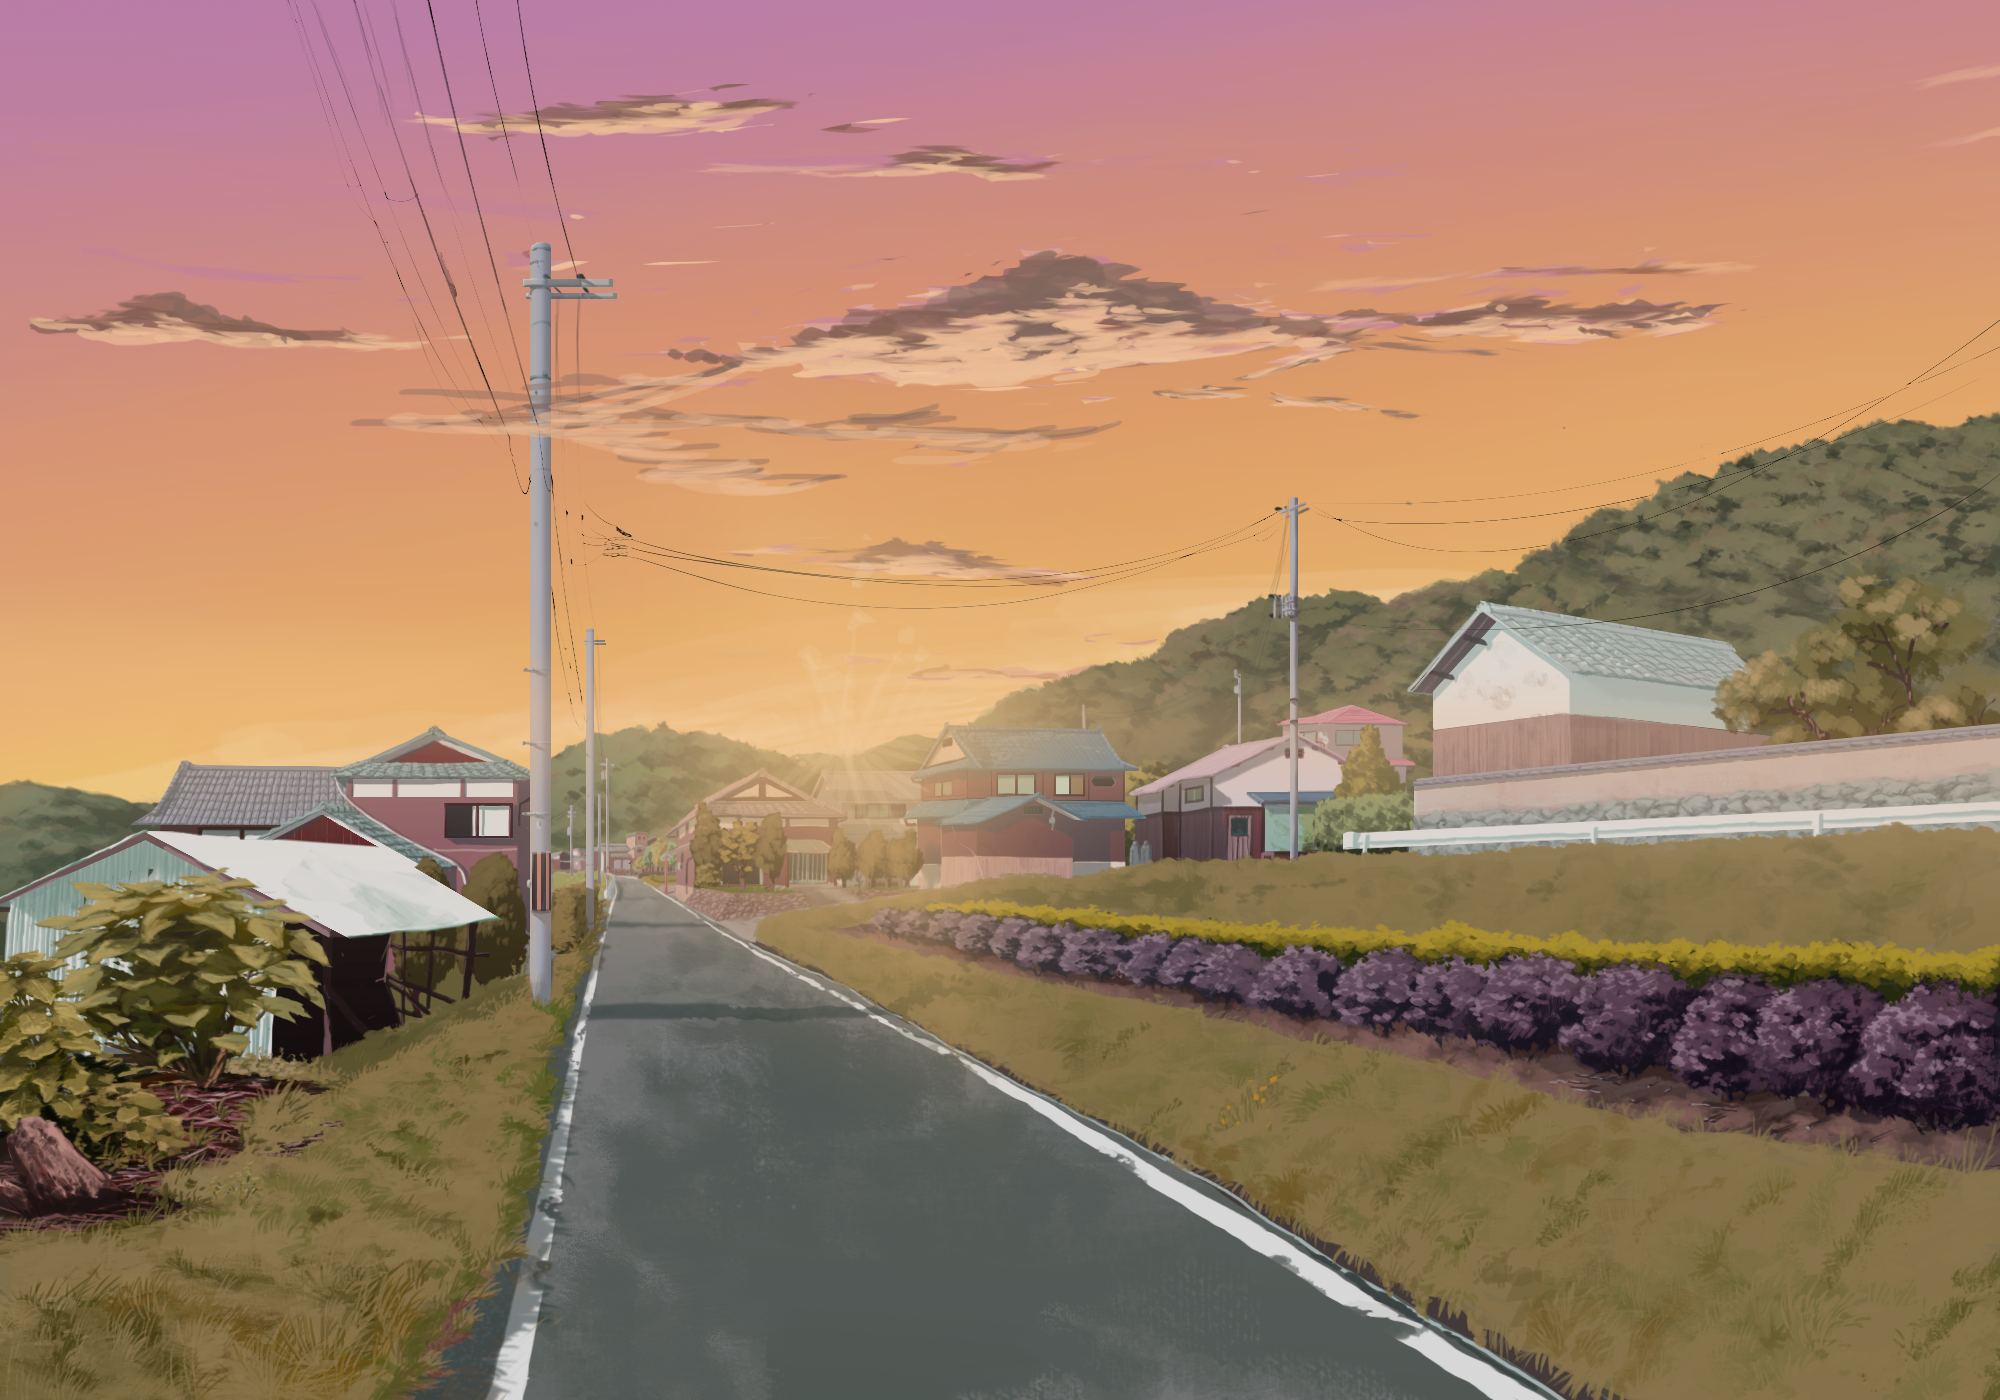 Anime Road HD Wallpaper | Background Image